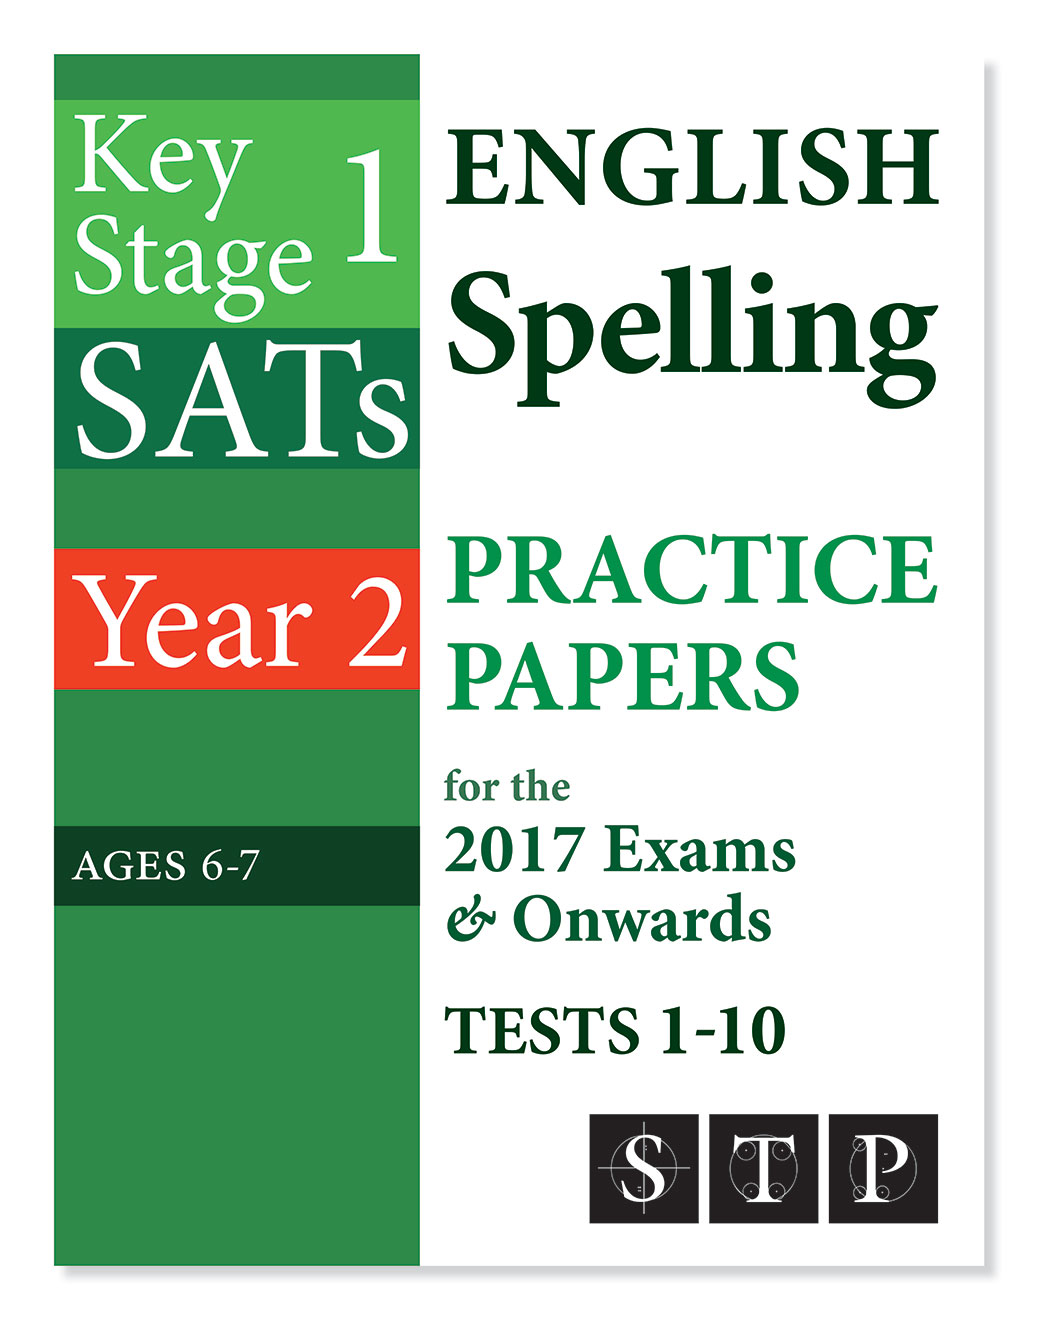 KS1 SATs English Spelling Practice Papers Tests 1-10